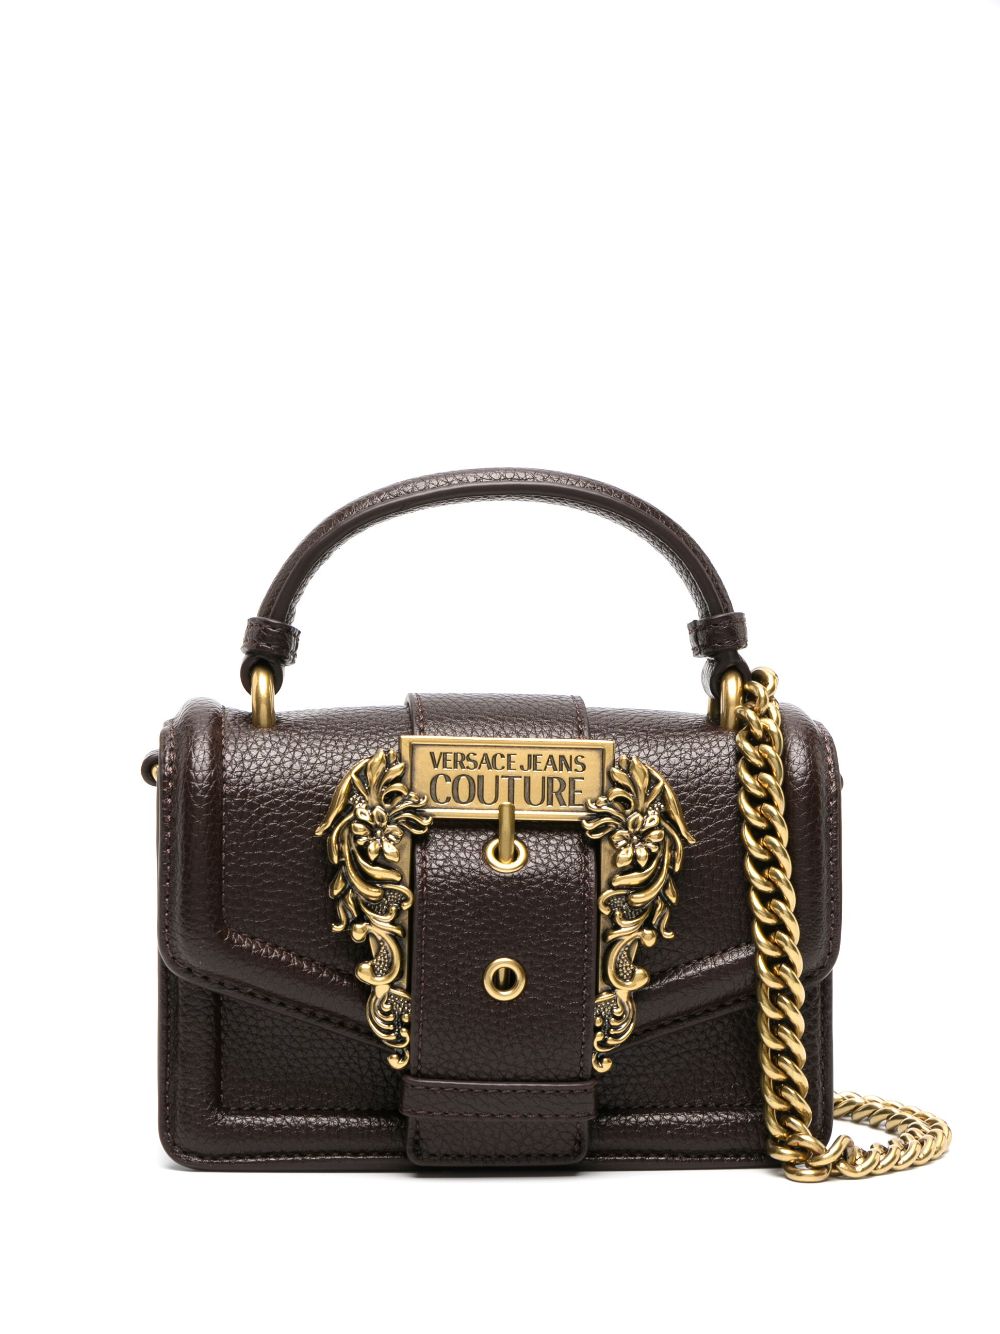 versace jean couture handbag - OFF-61% >Free Delivery